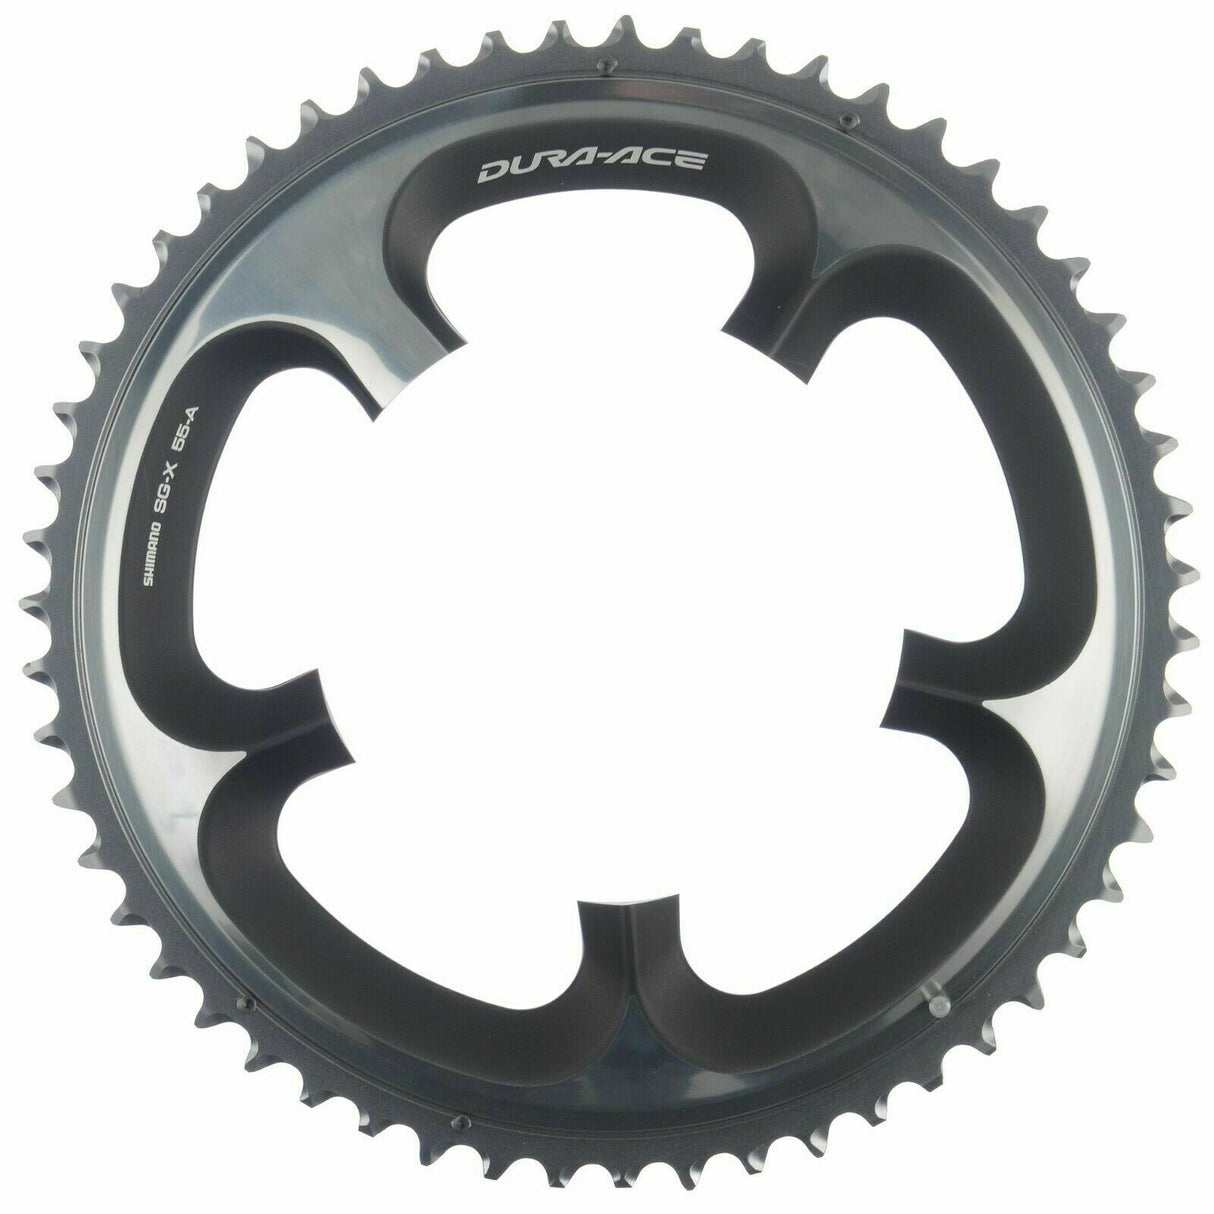 Shimano Dura-Ace FC-7900 53T Road Bike Chainring - A-Type - 130mm BCD - Sportandleisure.com (7506693816577)